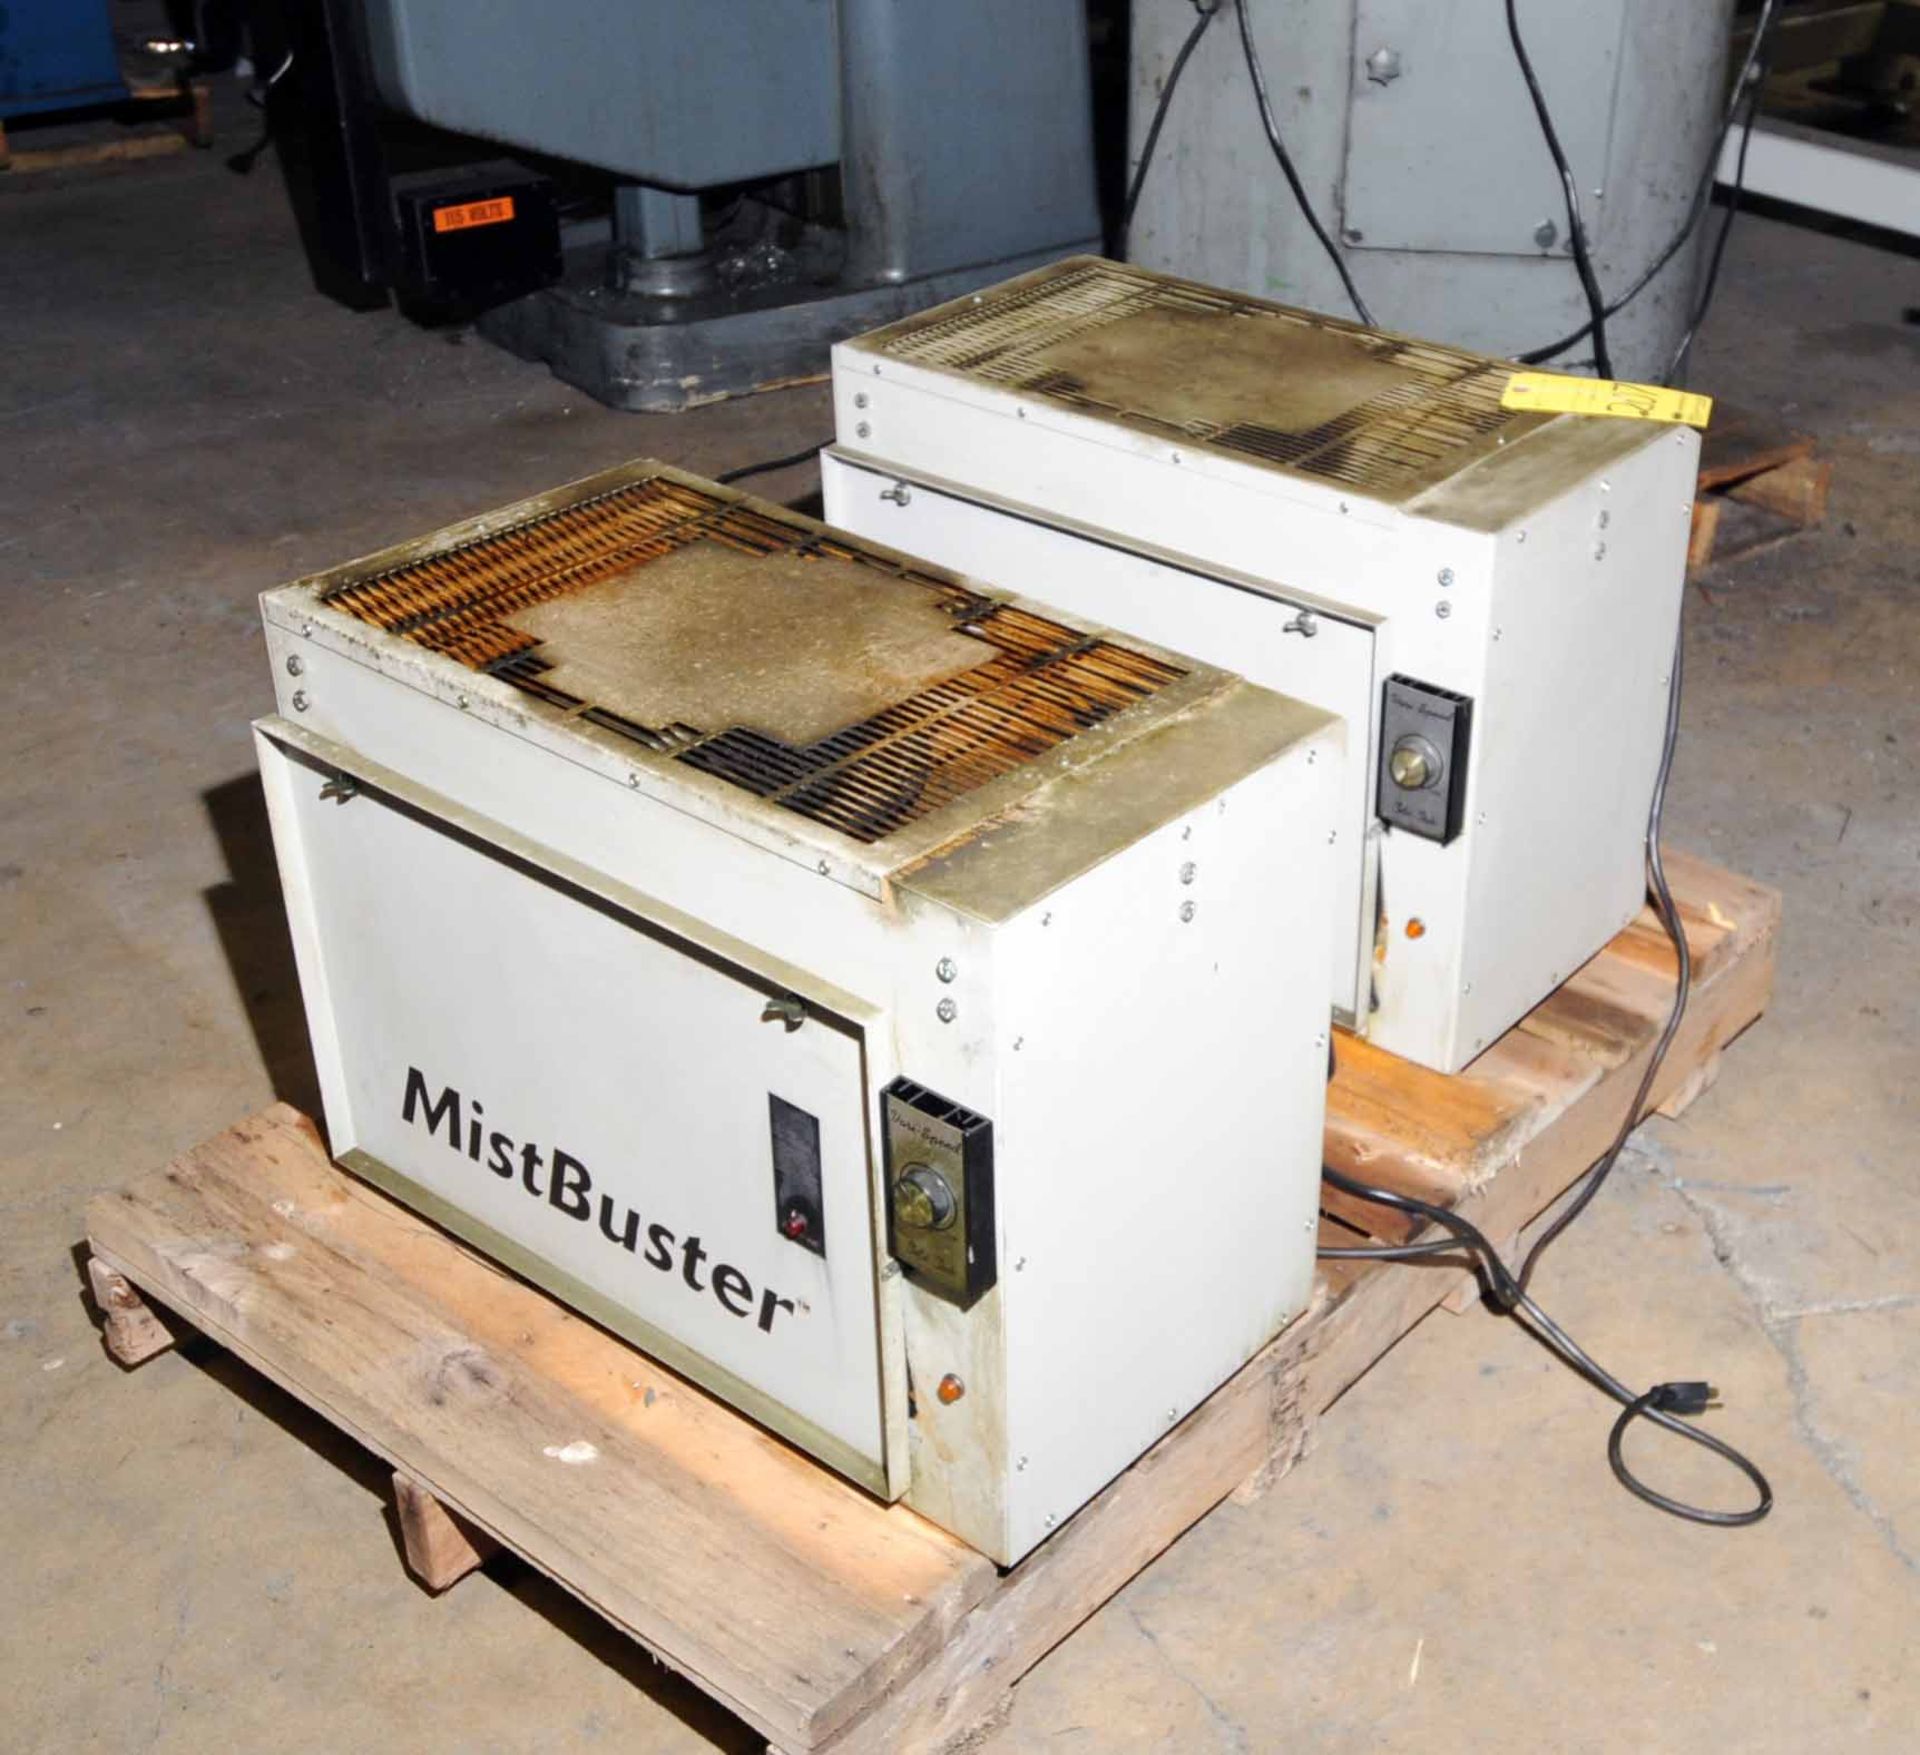 LOT OF MIST COLLECTORS (2), MISTBUSTER, variable spd. drive fan (Sold by photo. Located offsite at